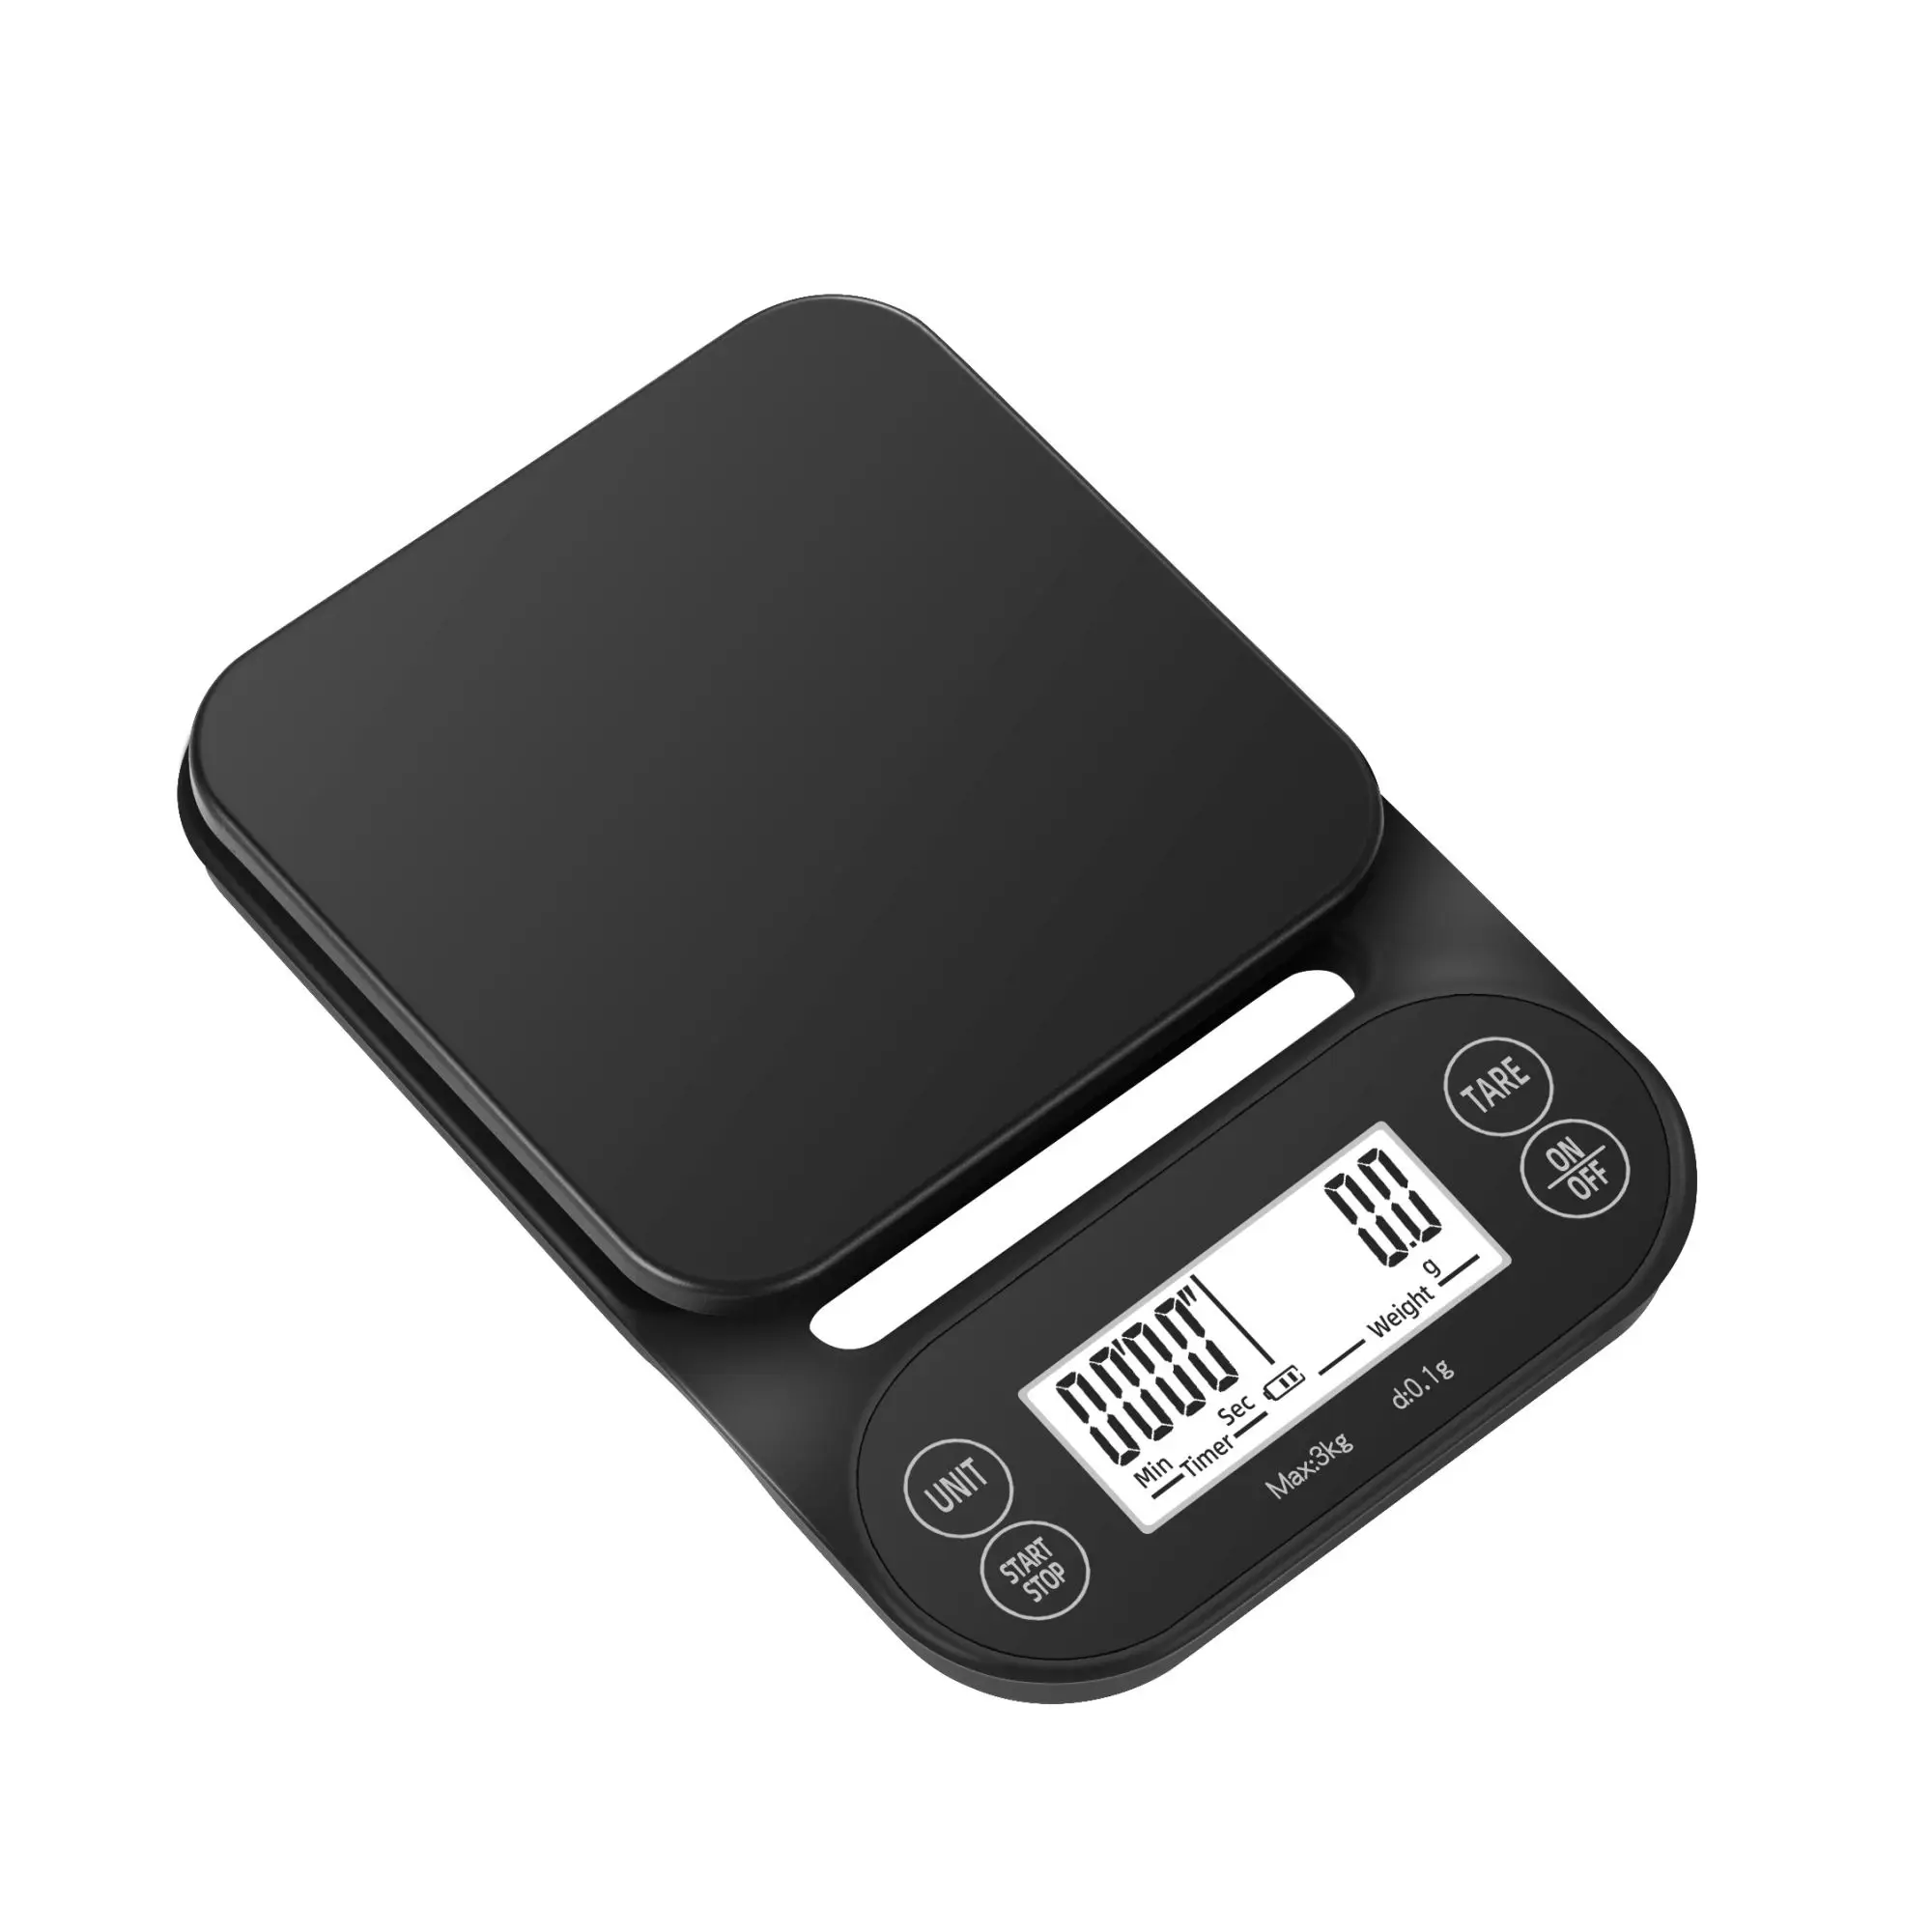 

High Quality Electric Electronic Diamond Super Mini Digital Pocket For Food Coffee Scale With Timer 0.1G, Black